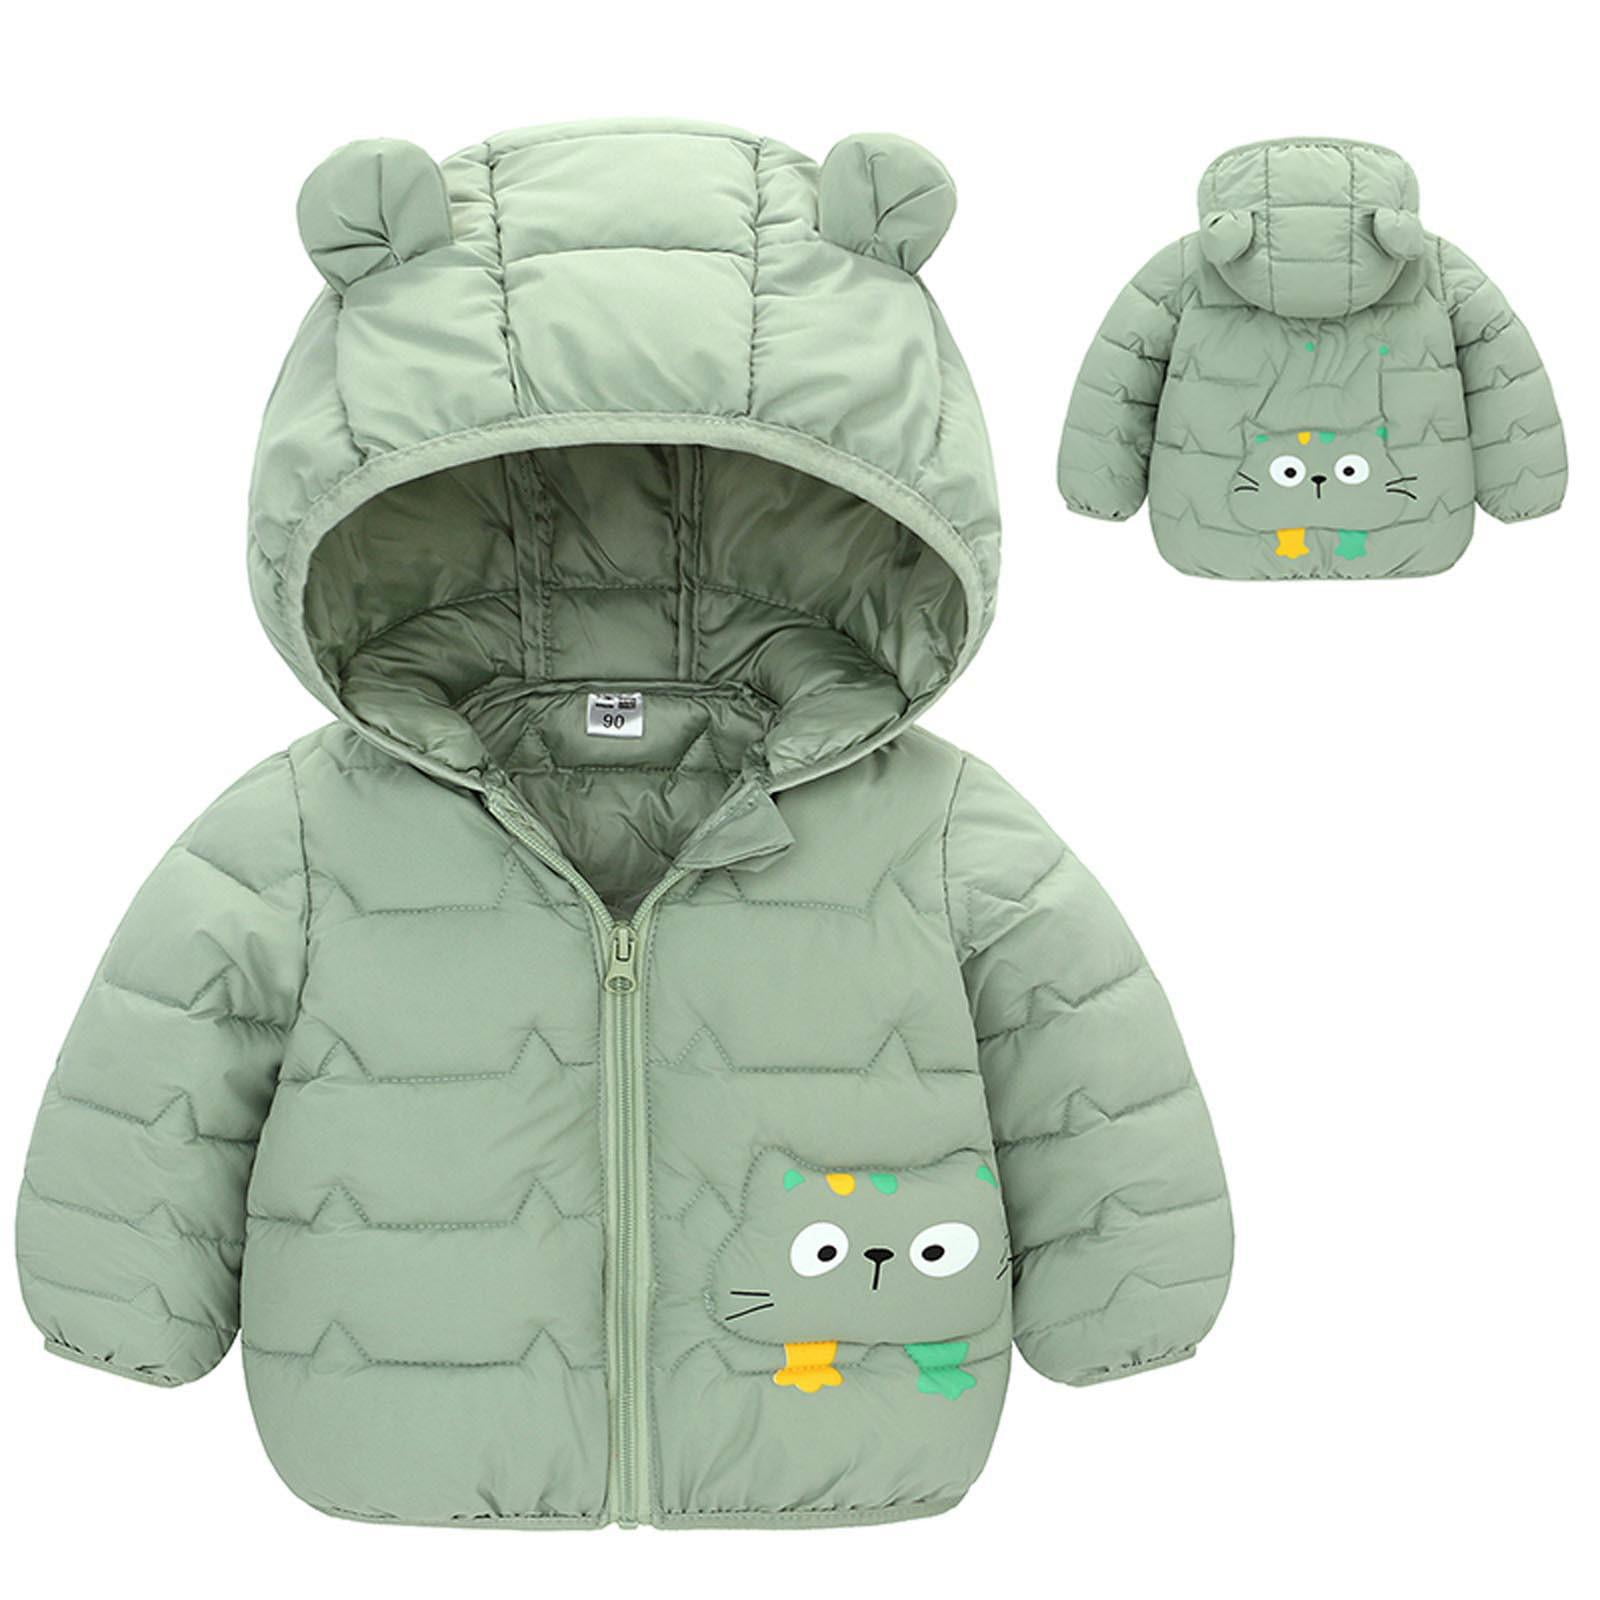 Tdoqot Jackets for Girls and Boys Quilted Jackets Cute with Hood Zip up ...